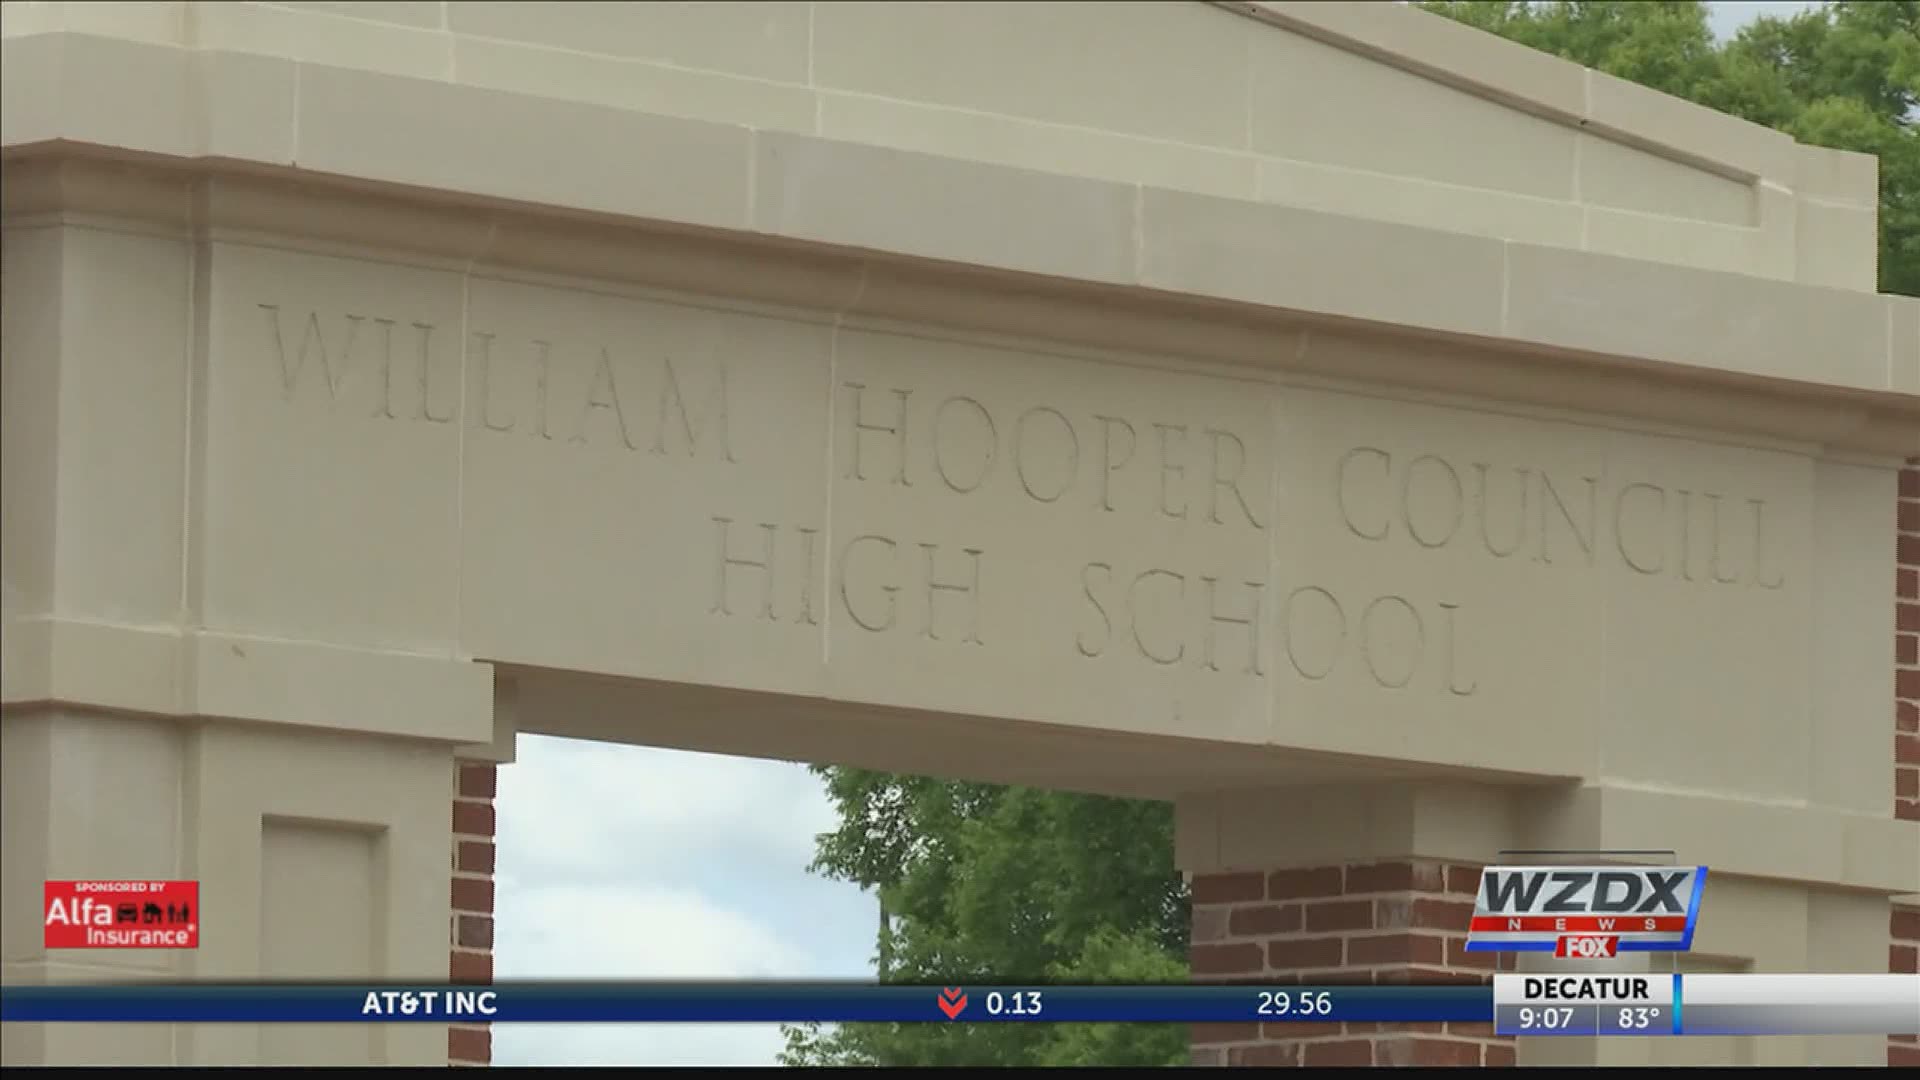 The Councill High School Park is being built in honor of Huntsville’s first public school for African American students, and of course, William Hooper Councill.